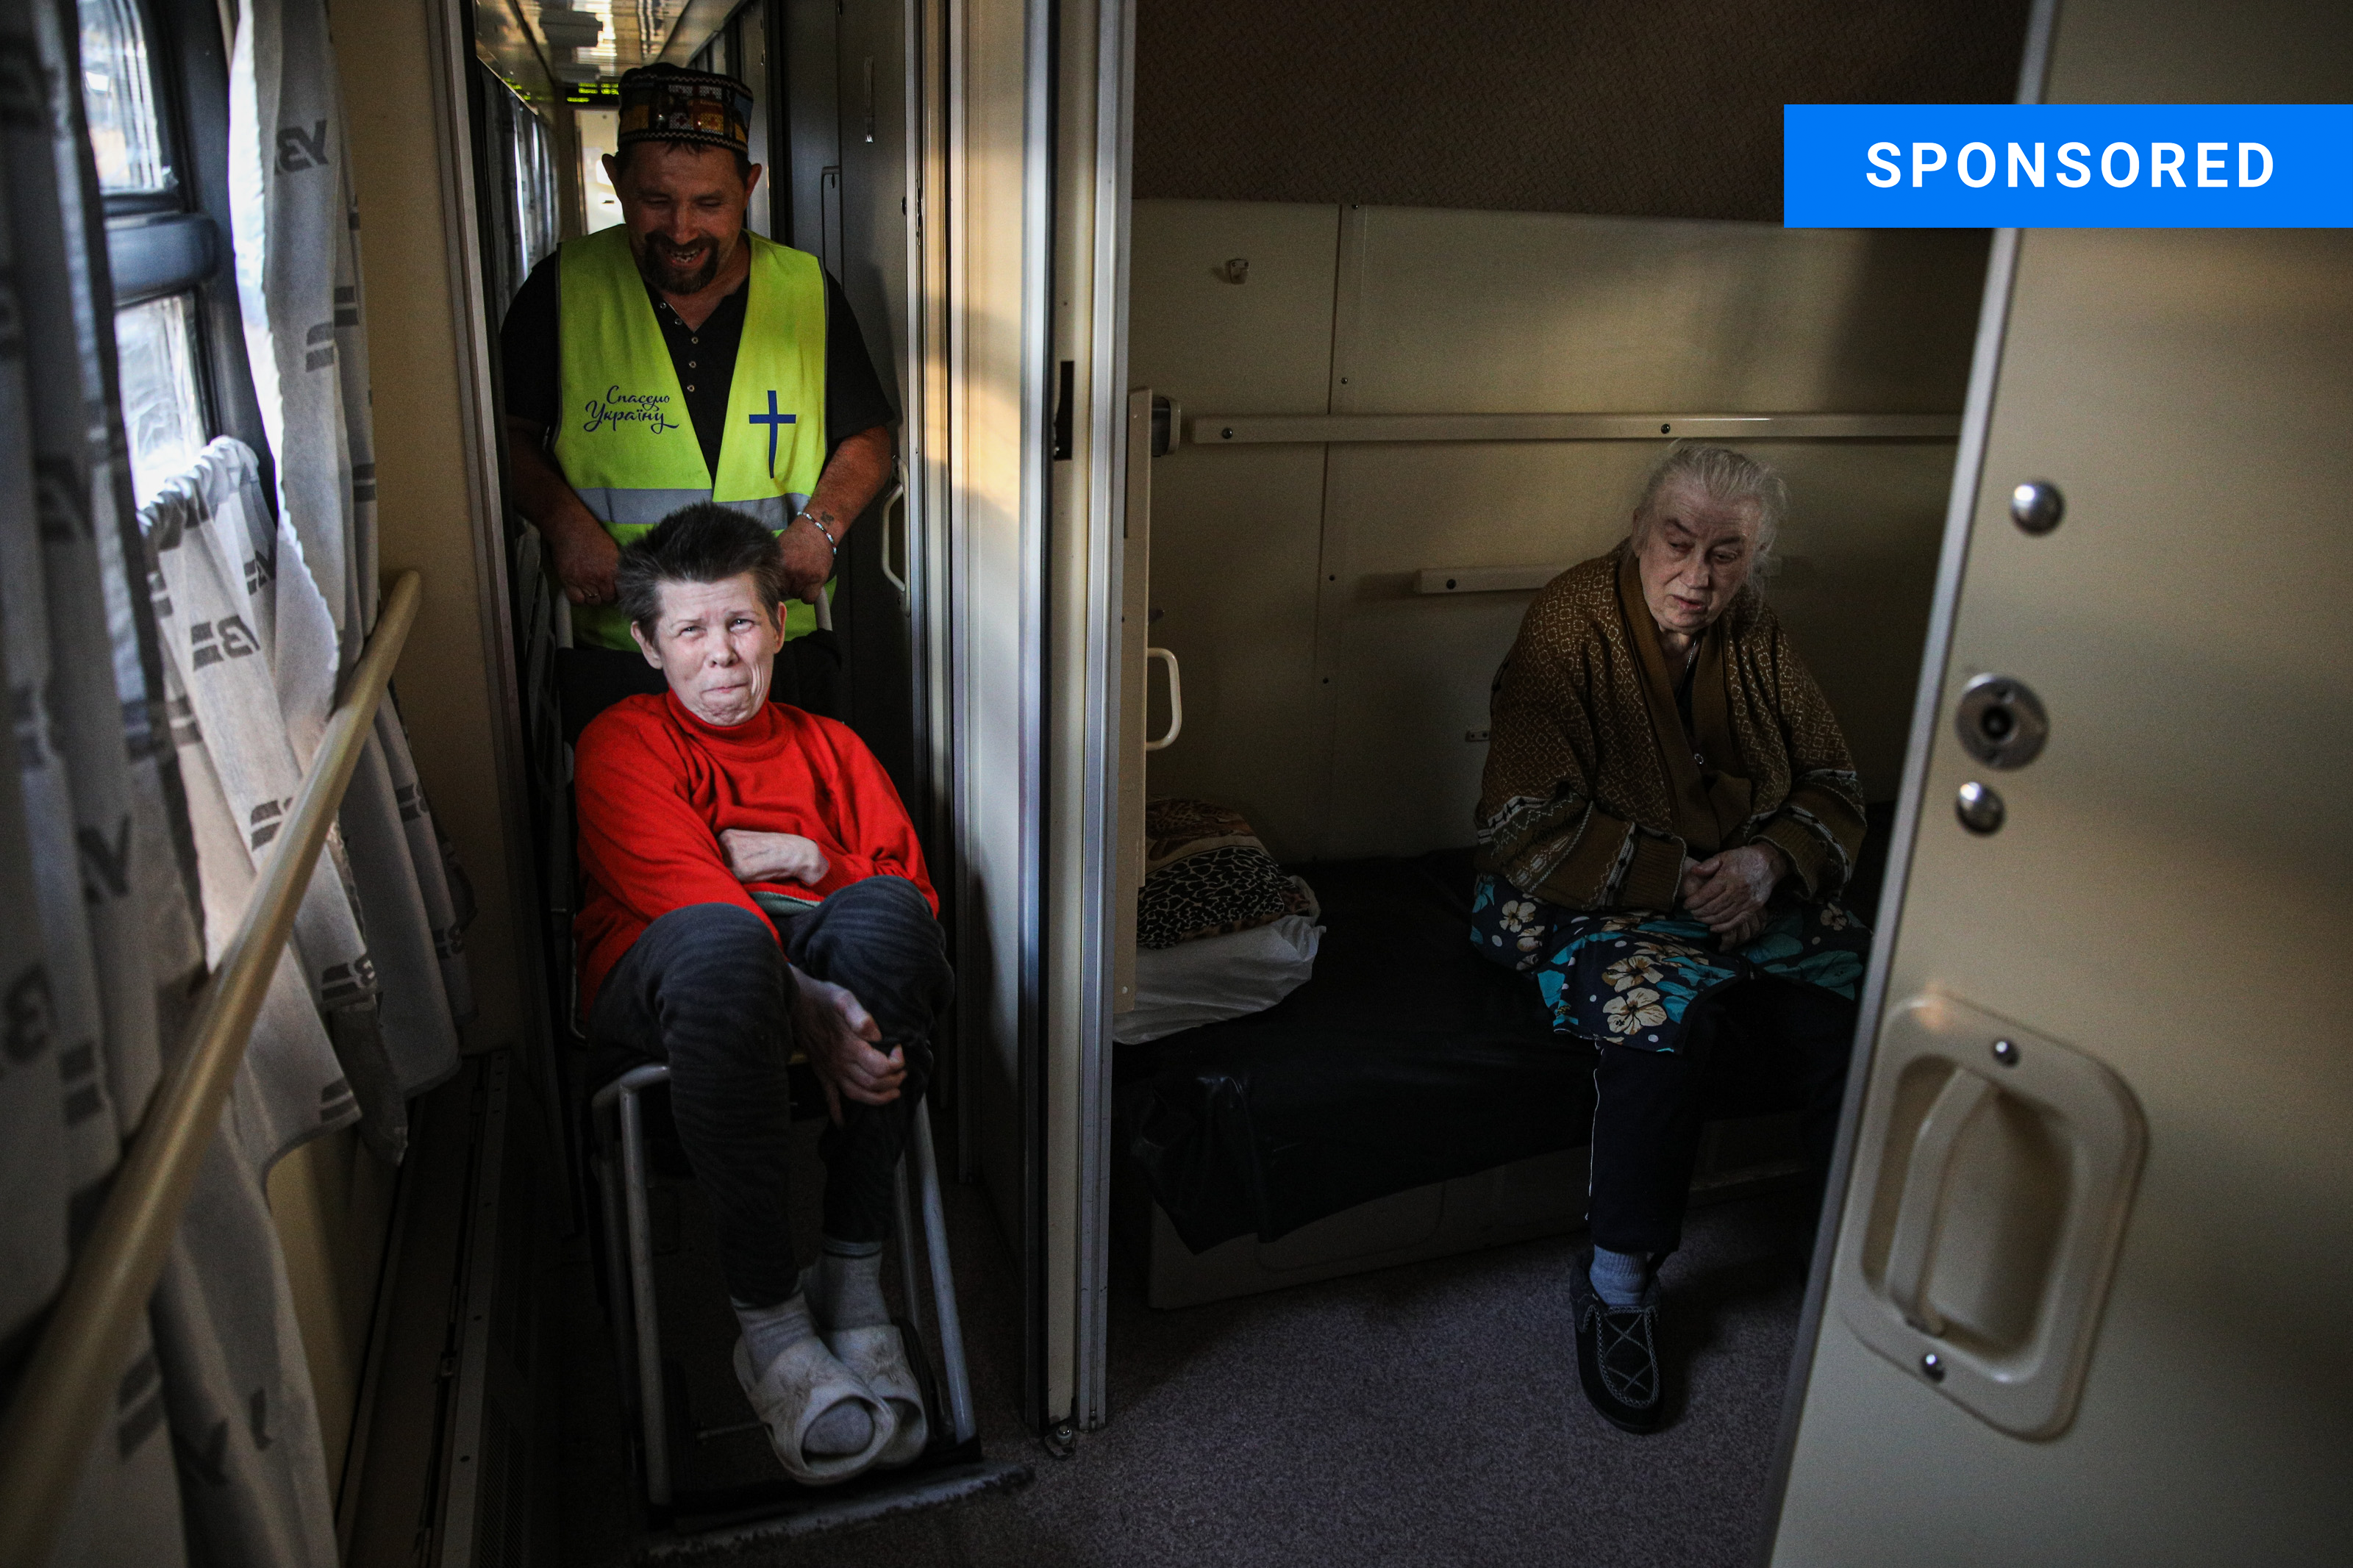 Vostok SOS helps evacuate over 23,000 people fleeing Russia's war, continues its mission